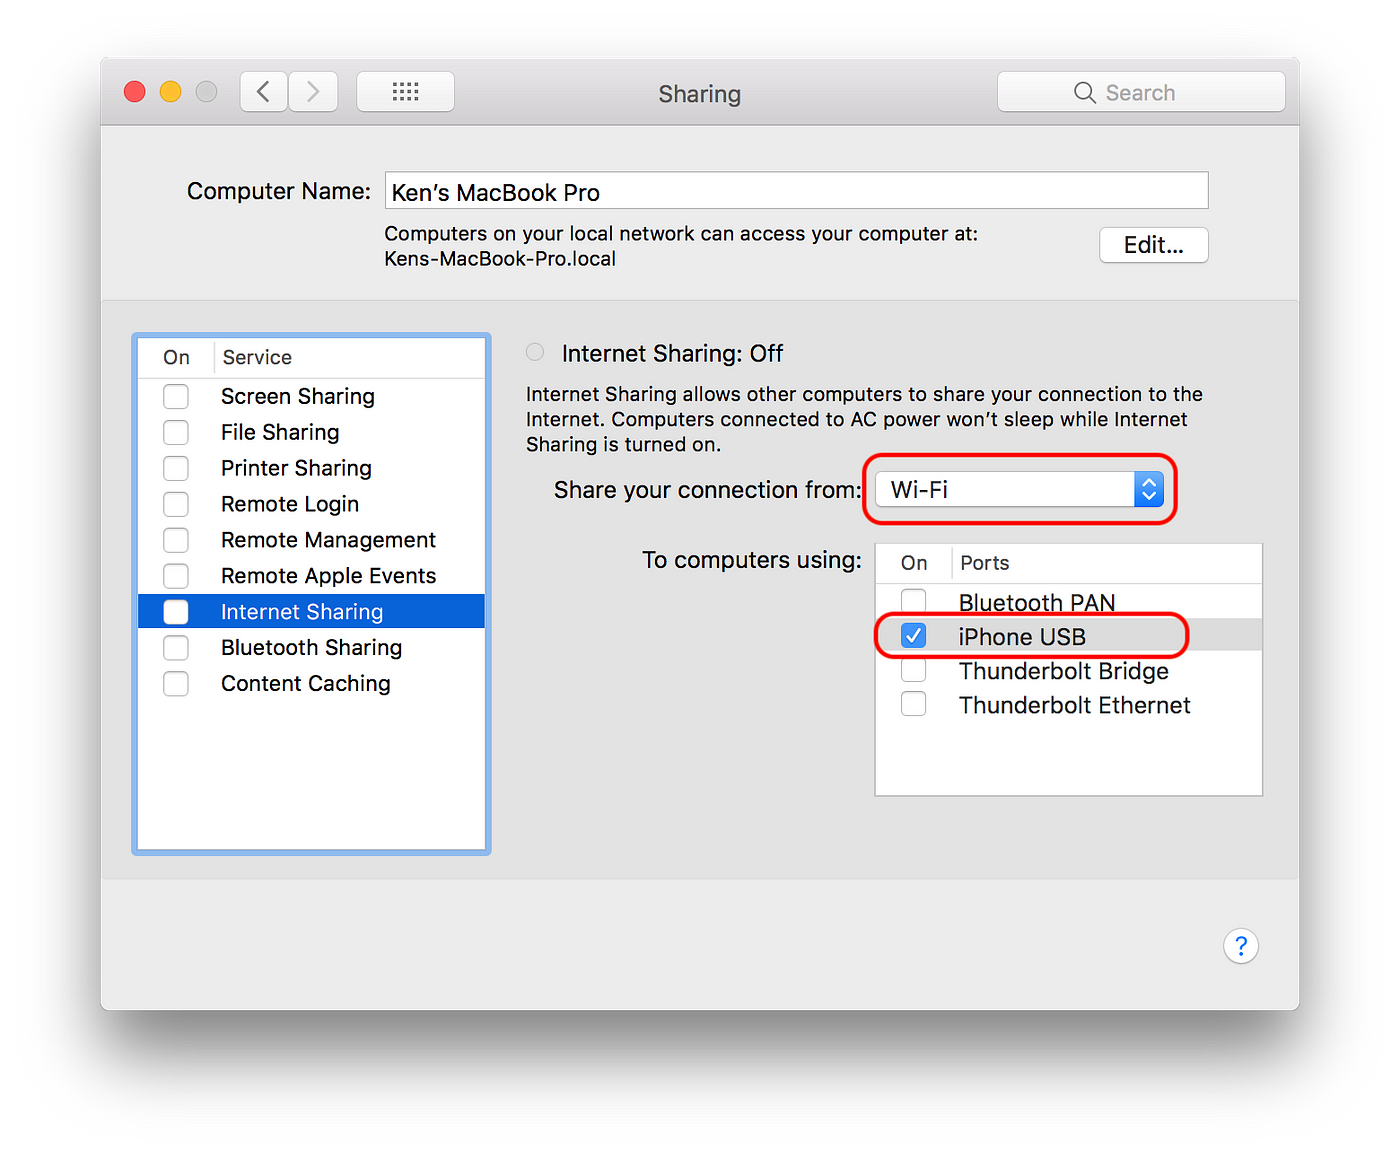 Afspejling Bungalow cigaret Macbook Personal Hotspot to your iPhone, iPad or iPod via iPhone USB | by  Nitipat Wuttisasiwat (Ken) | Medium